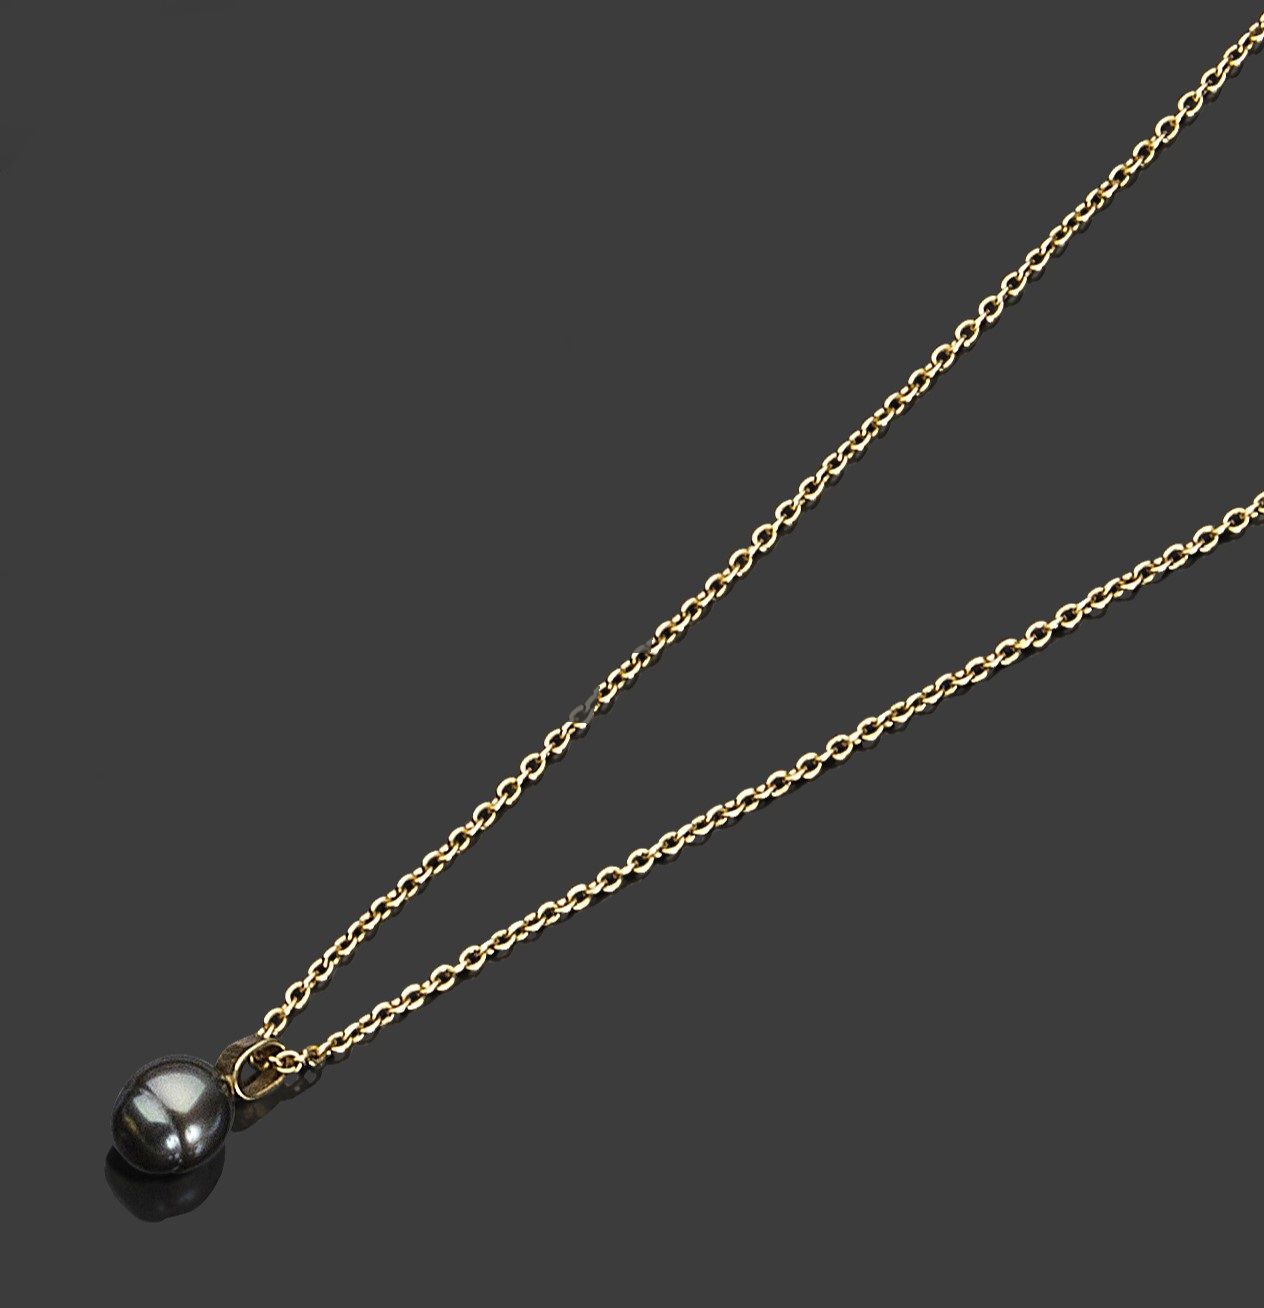 Null 18K yellow gold chain with black pearl pendant set in 18K gold

L chain 41 &hellip;